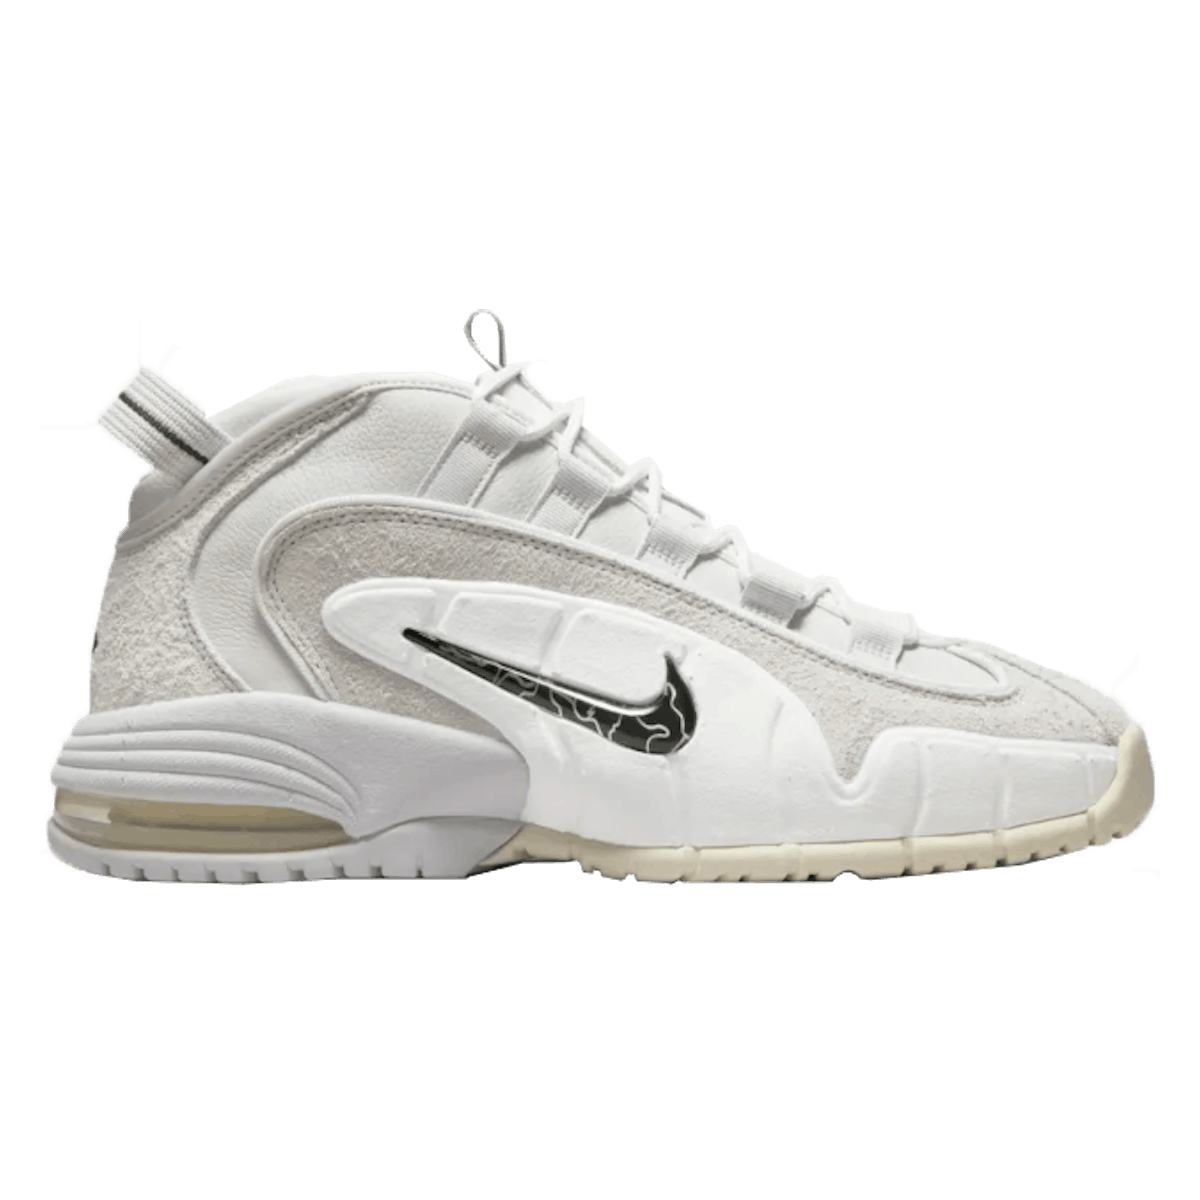 Nike Air Max Penny "Photon Dust and Summit White"